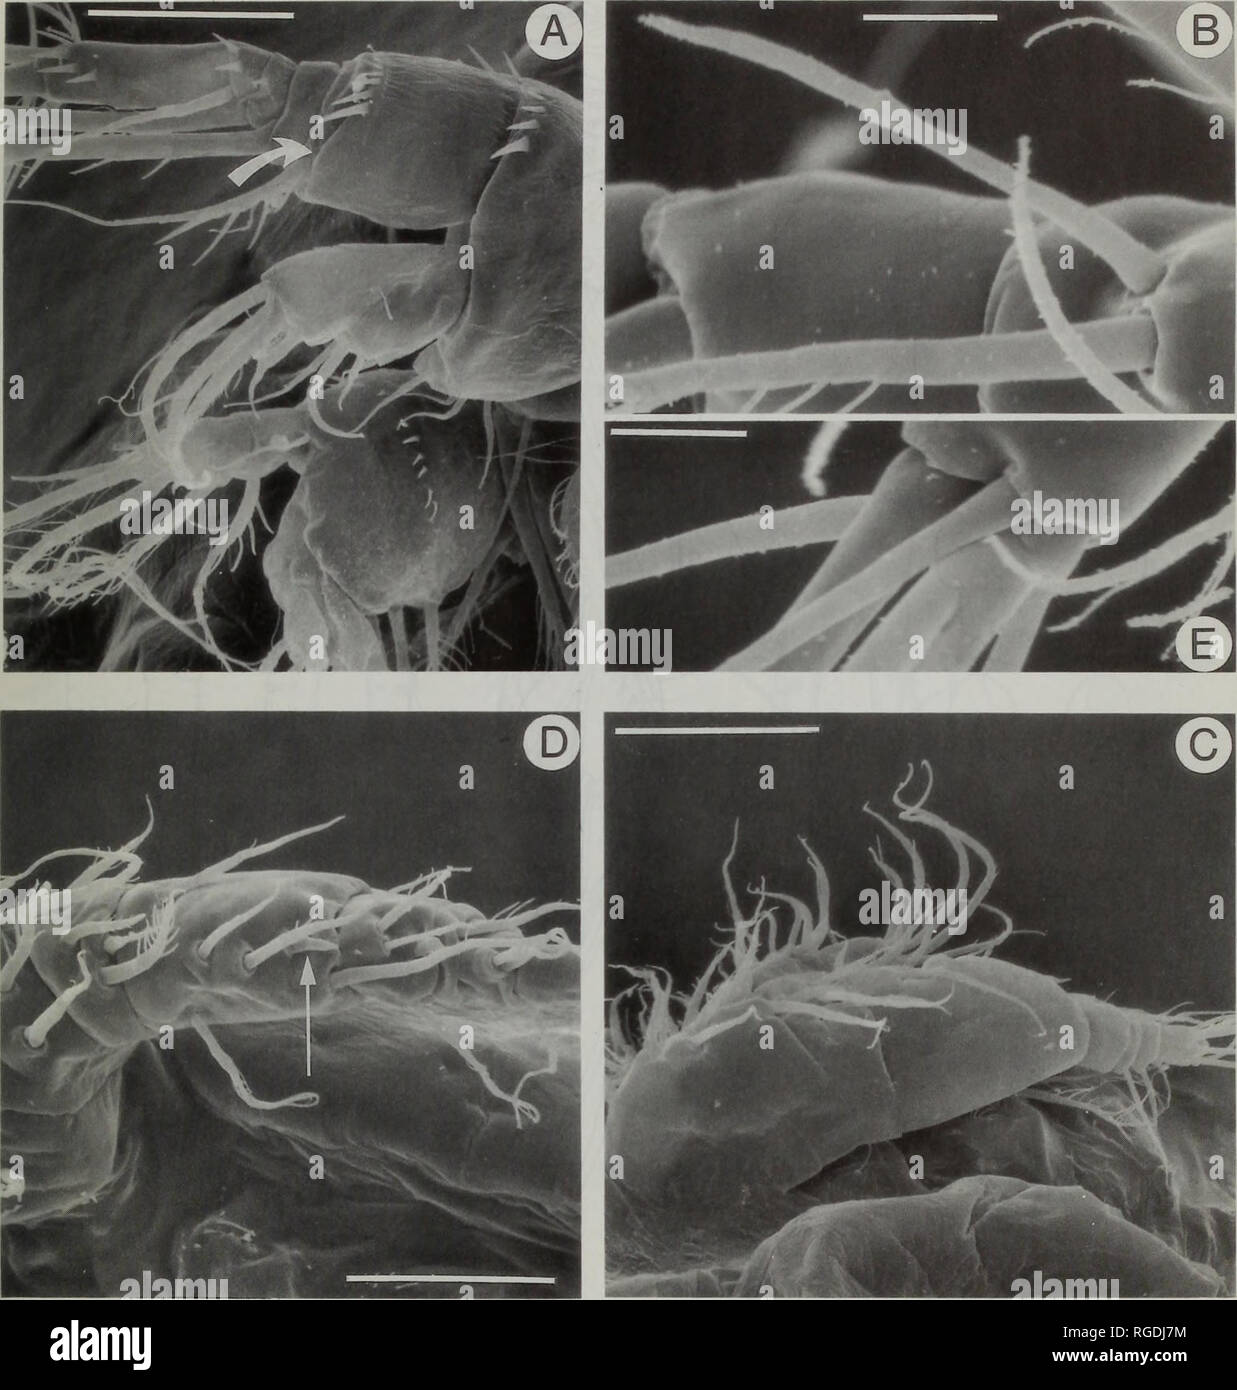 . Bulletin of the Natural History Museum Zoology. LIFE CYCLE OF PARACYCLOPS 59. Fig. 16 Scanning electron micrographs of P. fimbriatus. A, Nauplius VI antenna, ventral; arrow indicates minute second exopodal segment; B, Adult female antennule, aesthetasc on segment 5; C, Male copepodid V antennule, dorsal; D, Male copepodid IV antennule, ventral; arrow indi- cates the spine on segment 4; E, Adult female antennule, double fusion on terminal segment, lateral. Scale bars A = 20 urn, B = 5um, C = 40 urn, D = 25 urn, E = 5 um. aesthetasc, 2, 3, 7 + 1 aesthetasc. Second endopodal segment of antenna  Stock Photo